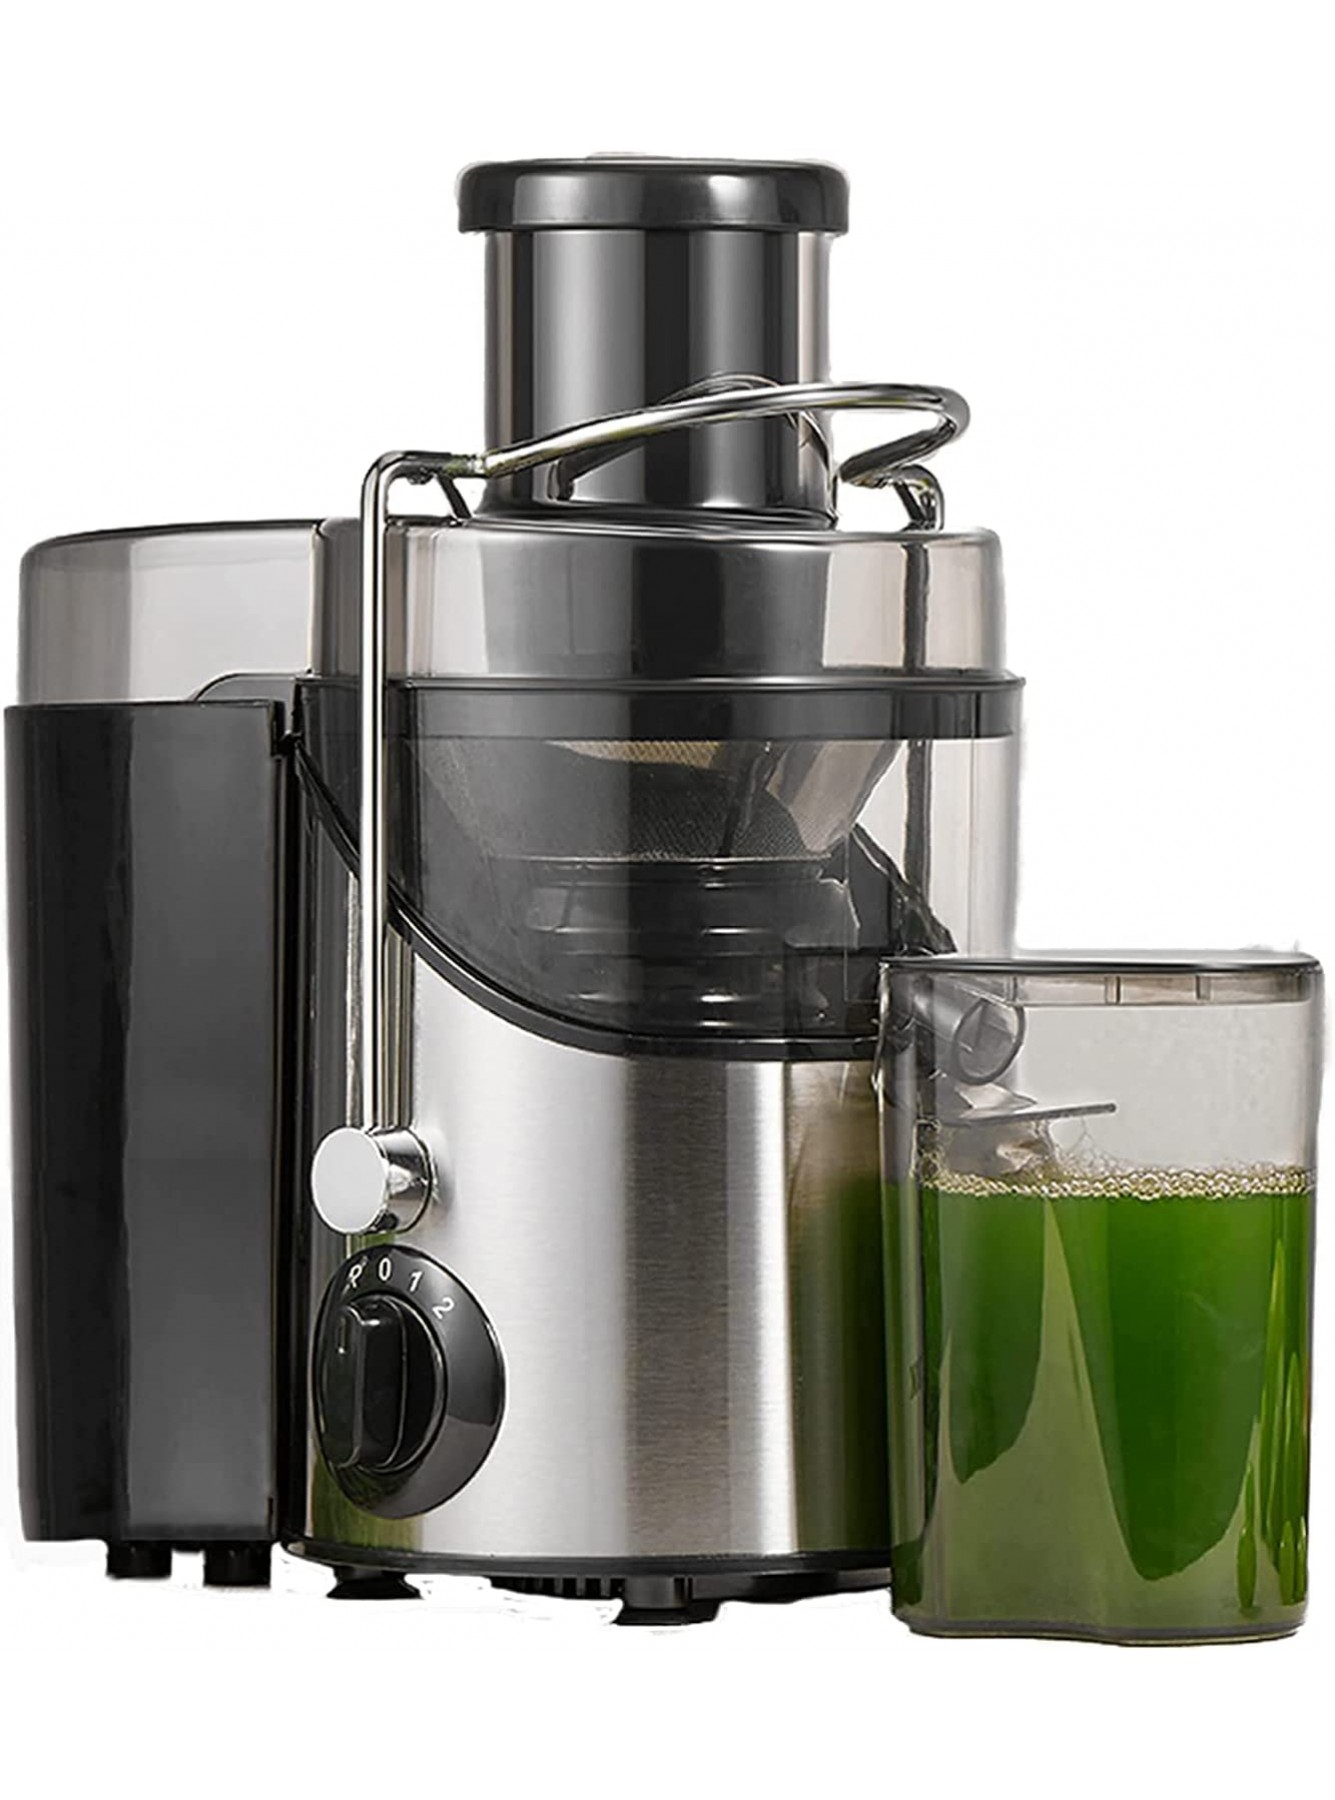 Juicer Extractor 400W Machines 3 Feed Chute Juice Centrifugal for Whole Fruit and Vegetables BPA Free 3 Speeds Stainless Steel Juice Maker Detachable Easy to Clean Brush Included B09M3ZYFQZ